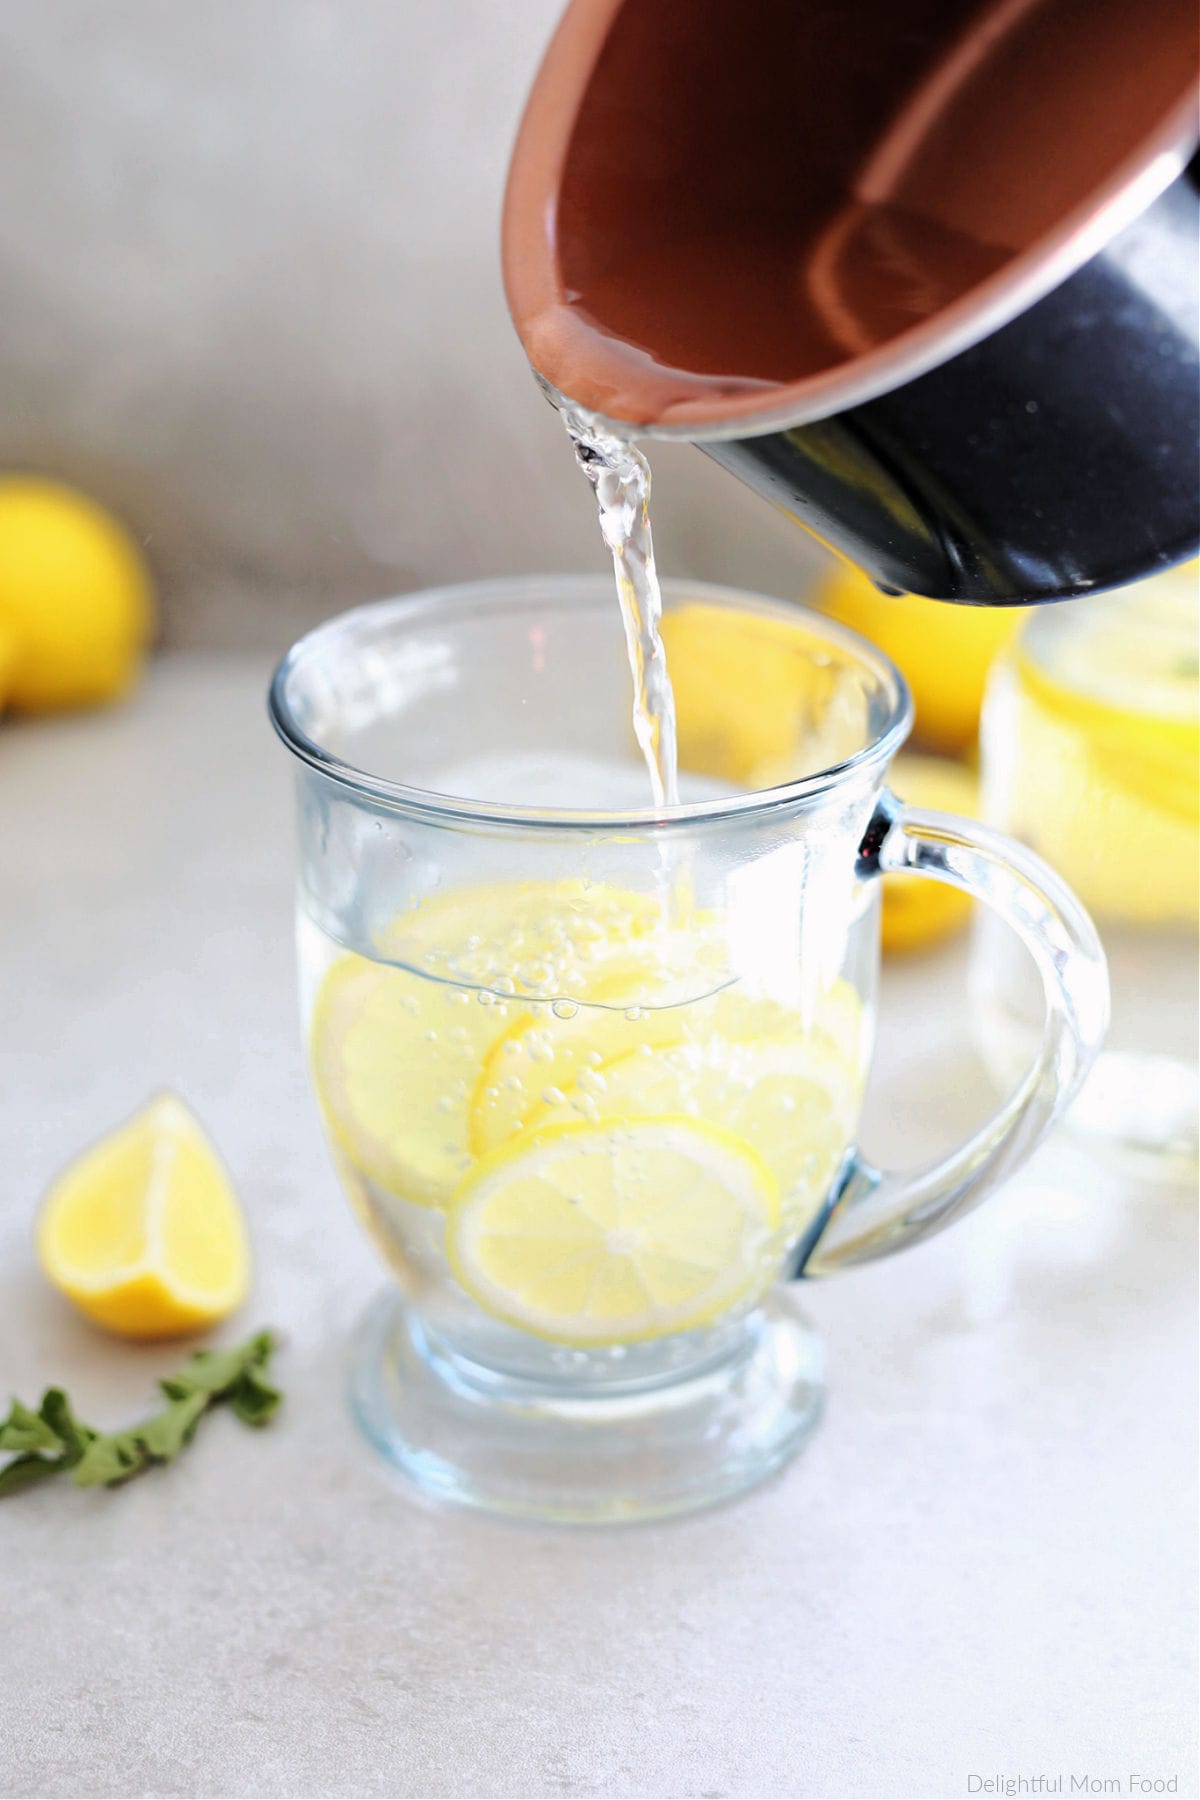 Saucepan pouring hot water over lemon juice and lemon citrus slices in a clear mug.